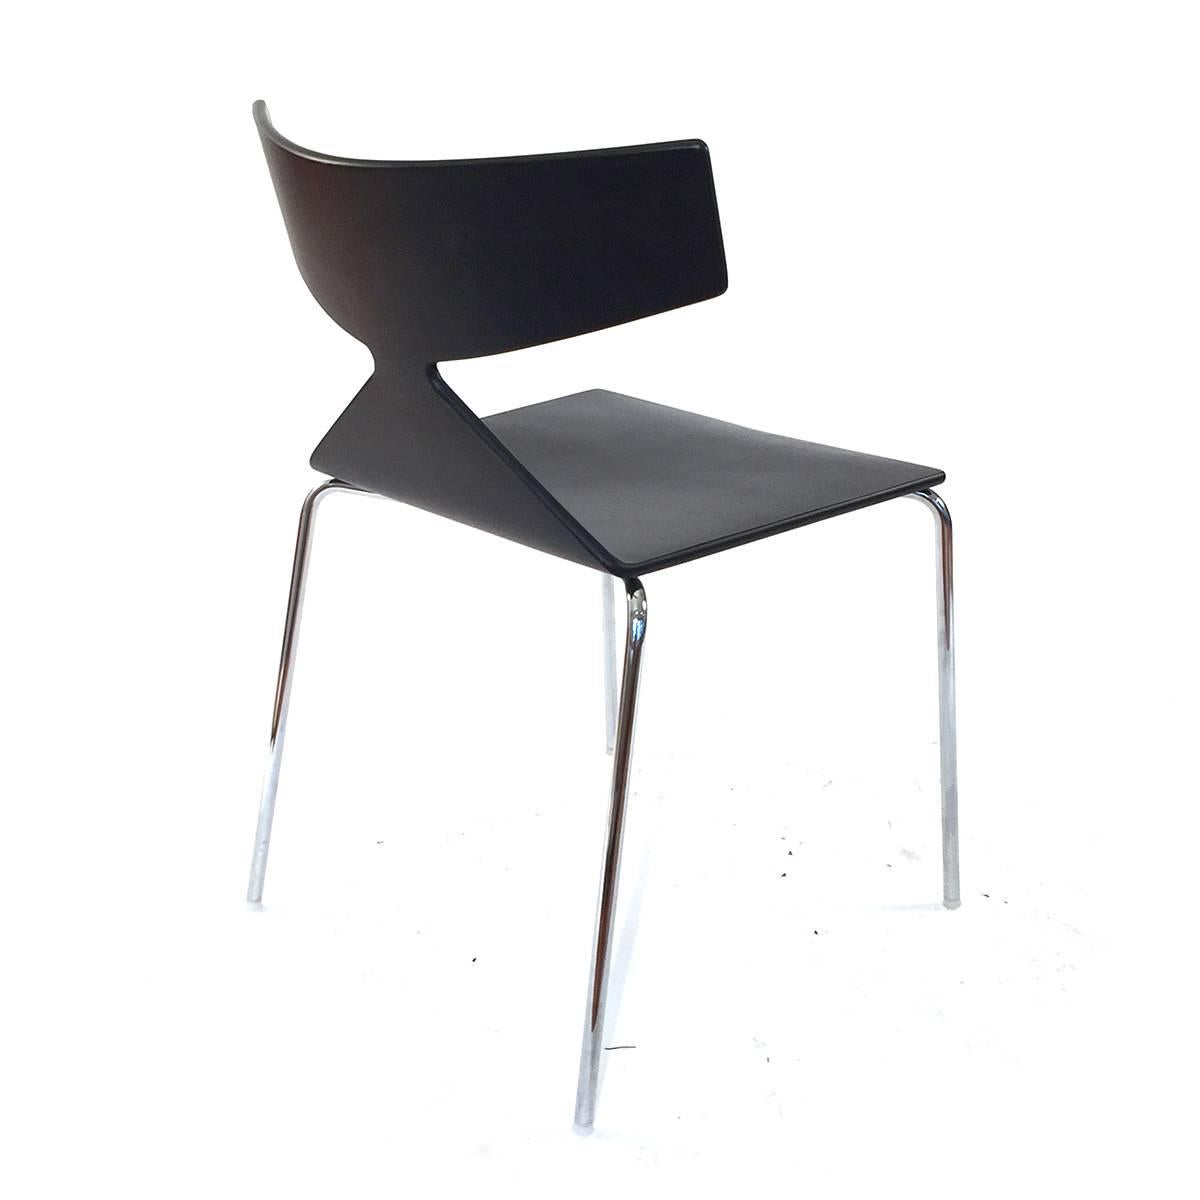 Italian Black Saya Wood Chair by Lievore Altherr Molina for Arper, Italy Modern Dining For Sale